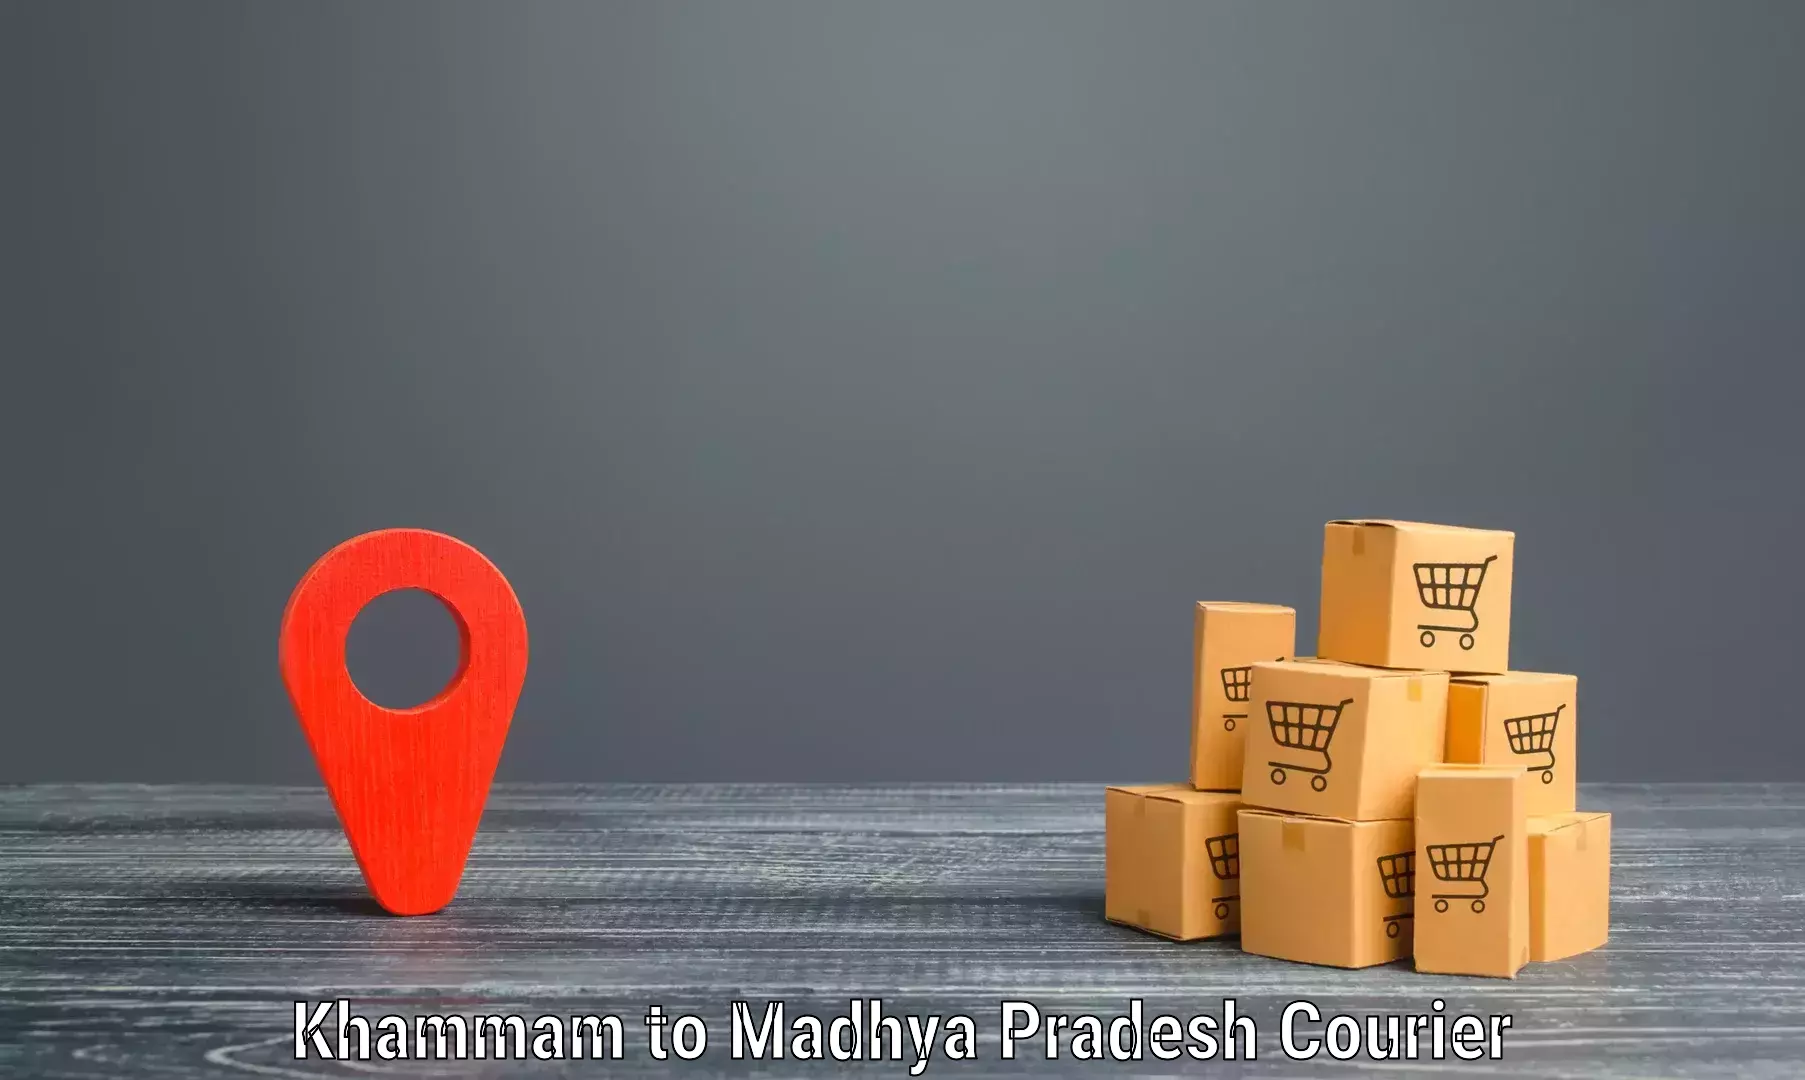 Package delivery network Khammam to Nepanagar